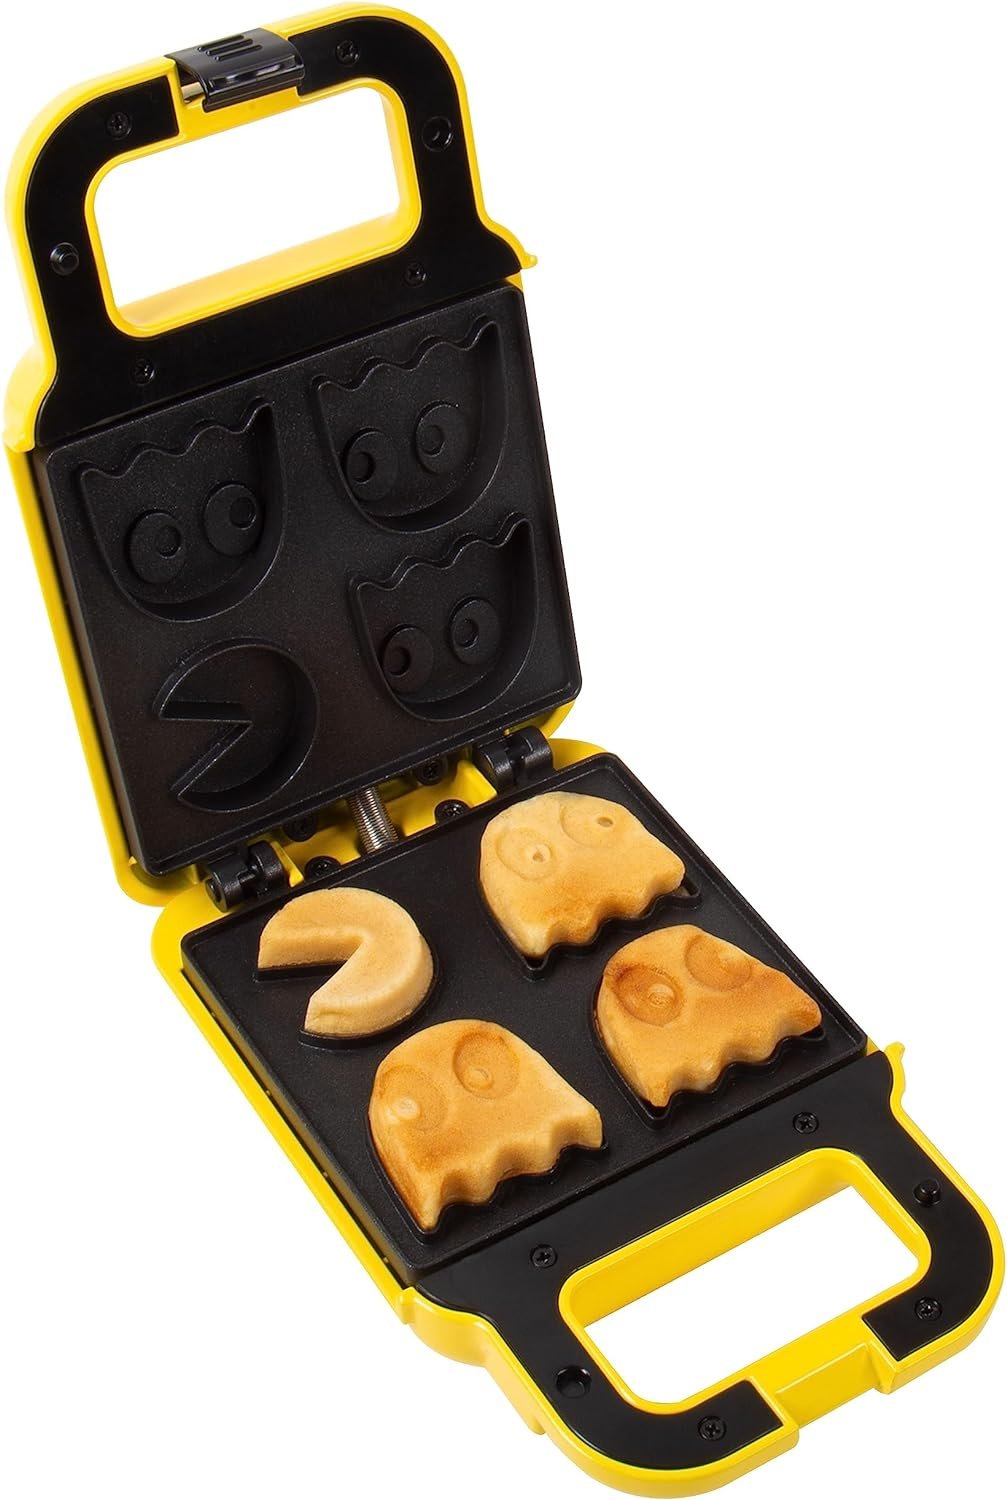 PAC-MAN Waffle Maker Review